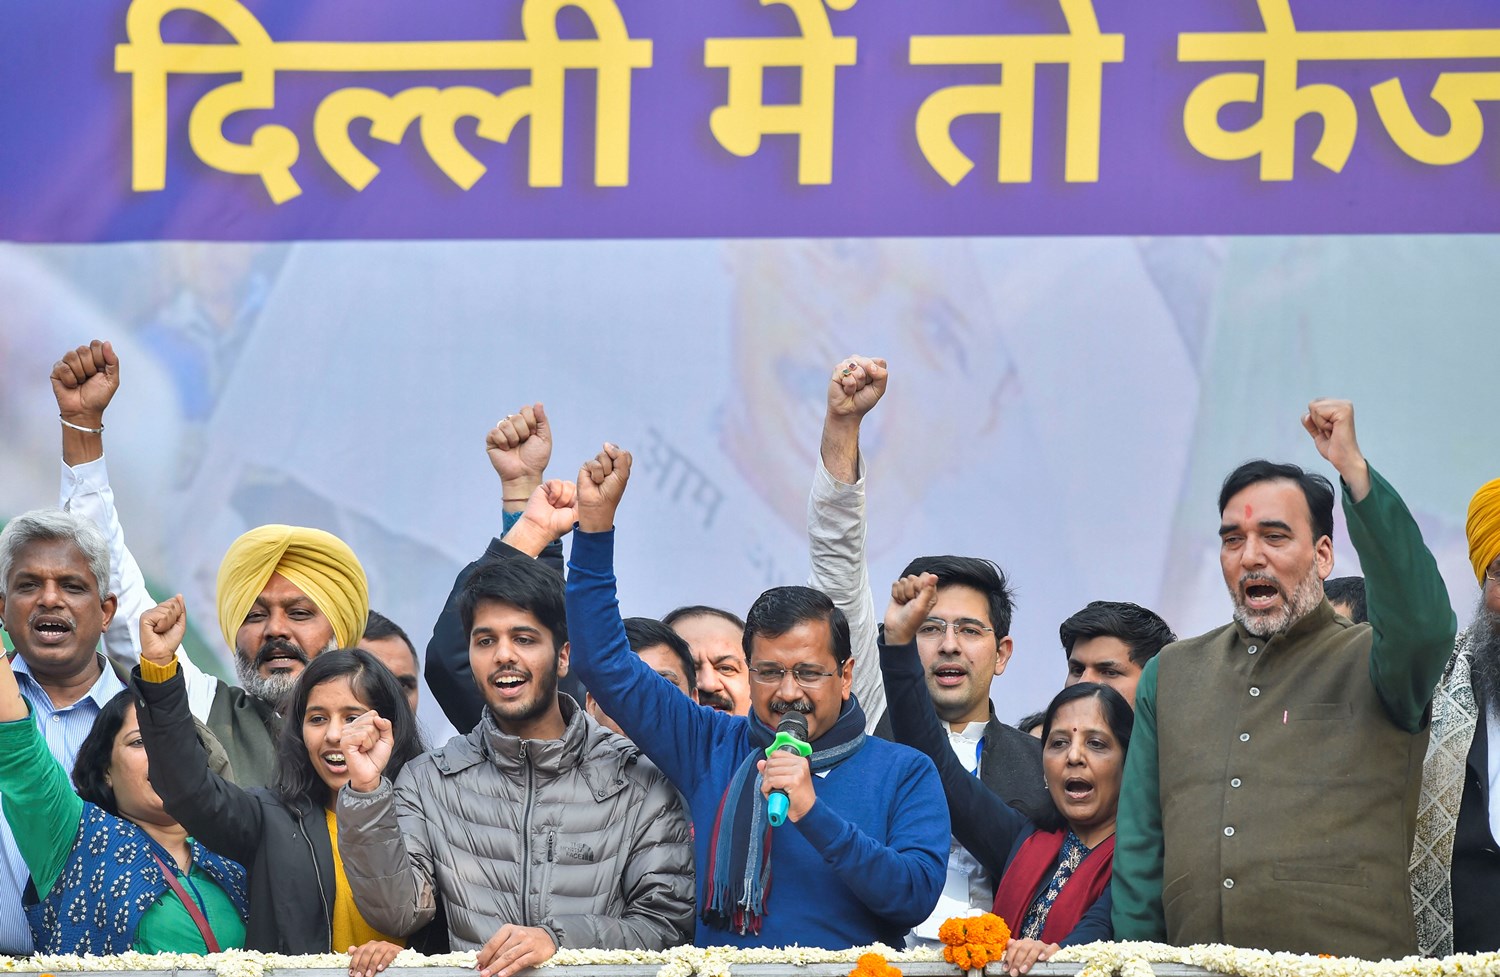 New Delhi: Delhi CM and AAP convenor Arvind Kejriwal (C) addreses supporters after party's victory in the State Assembly polls, at AAP office in New Delhi, Tuesday, Feb. 11, 2020. Kejriwal's wife Sunita, daughter Harshita, son Pulkit and party leaders Gopal Rai, Raghav Chadha are also seen. (PTI Photo/Ravi Choudhary)(PTI2_11_2020_000140B)